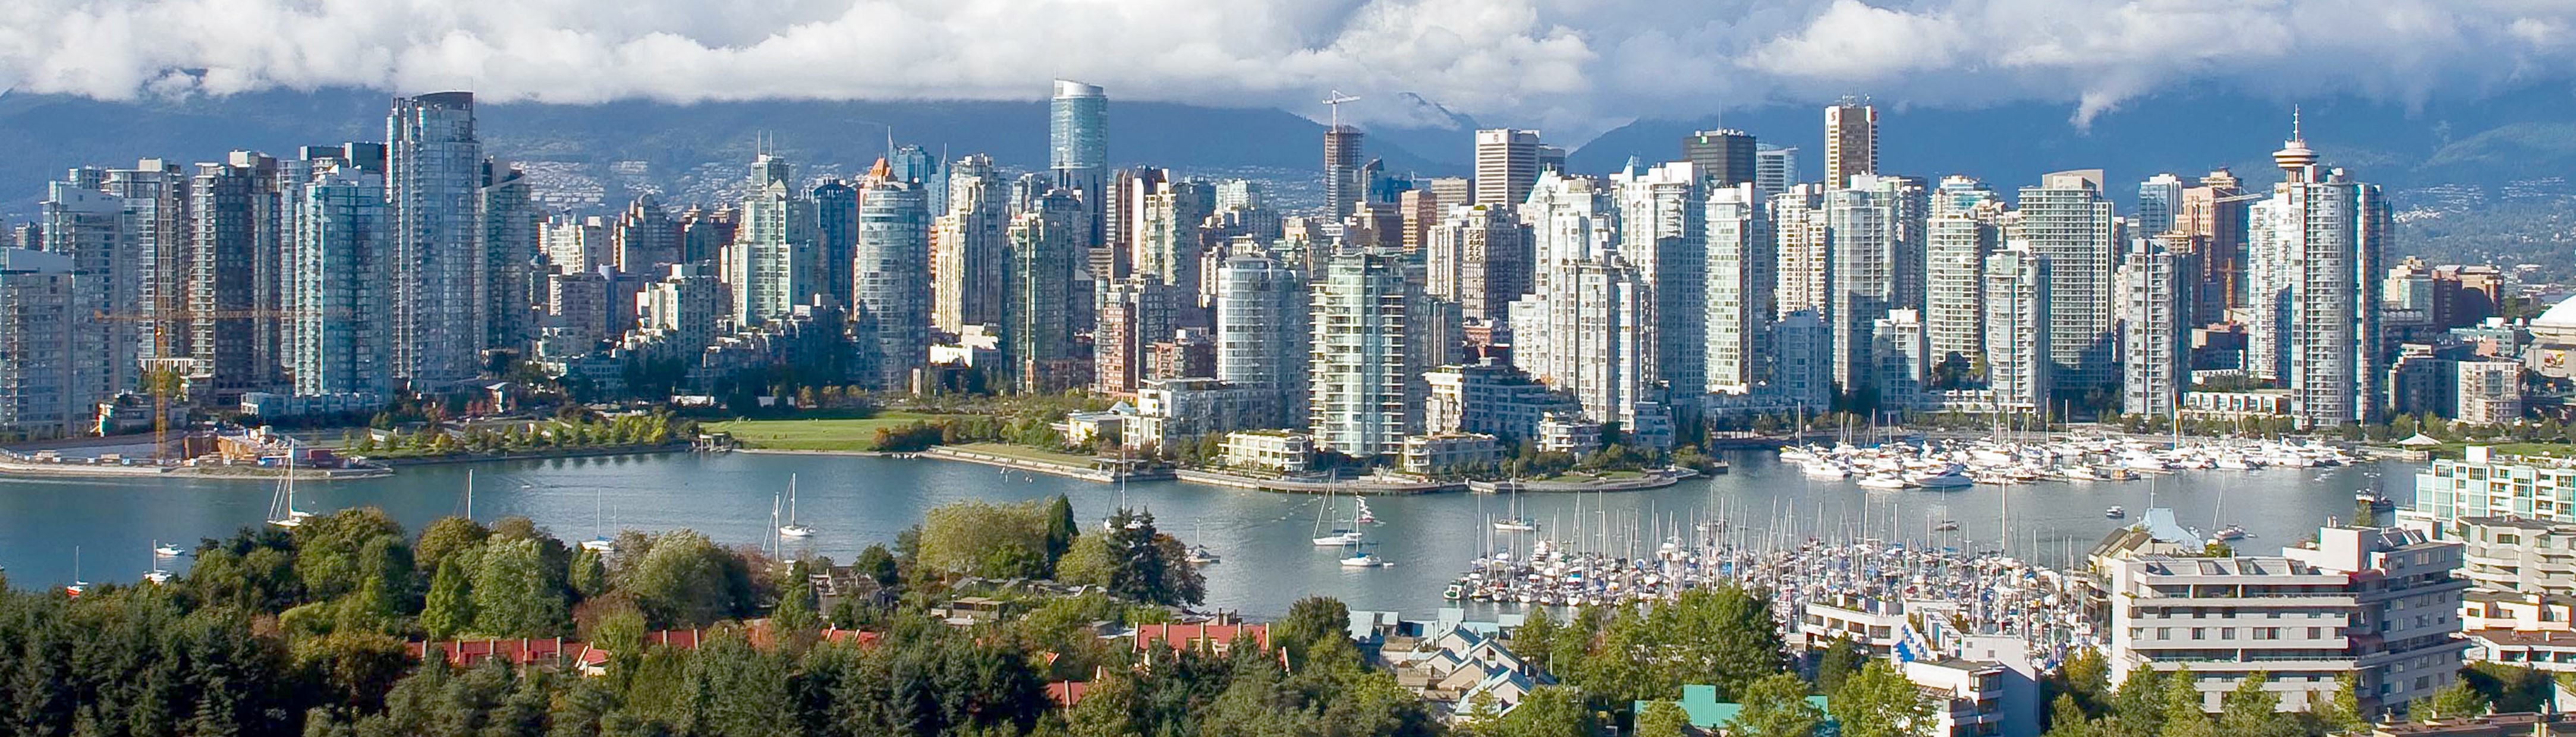 Management Training Courses in Vancouver, BC, Canada